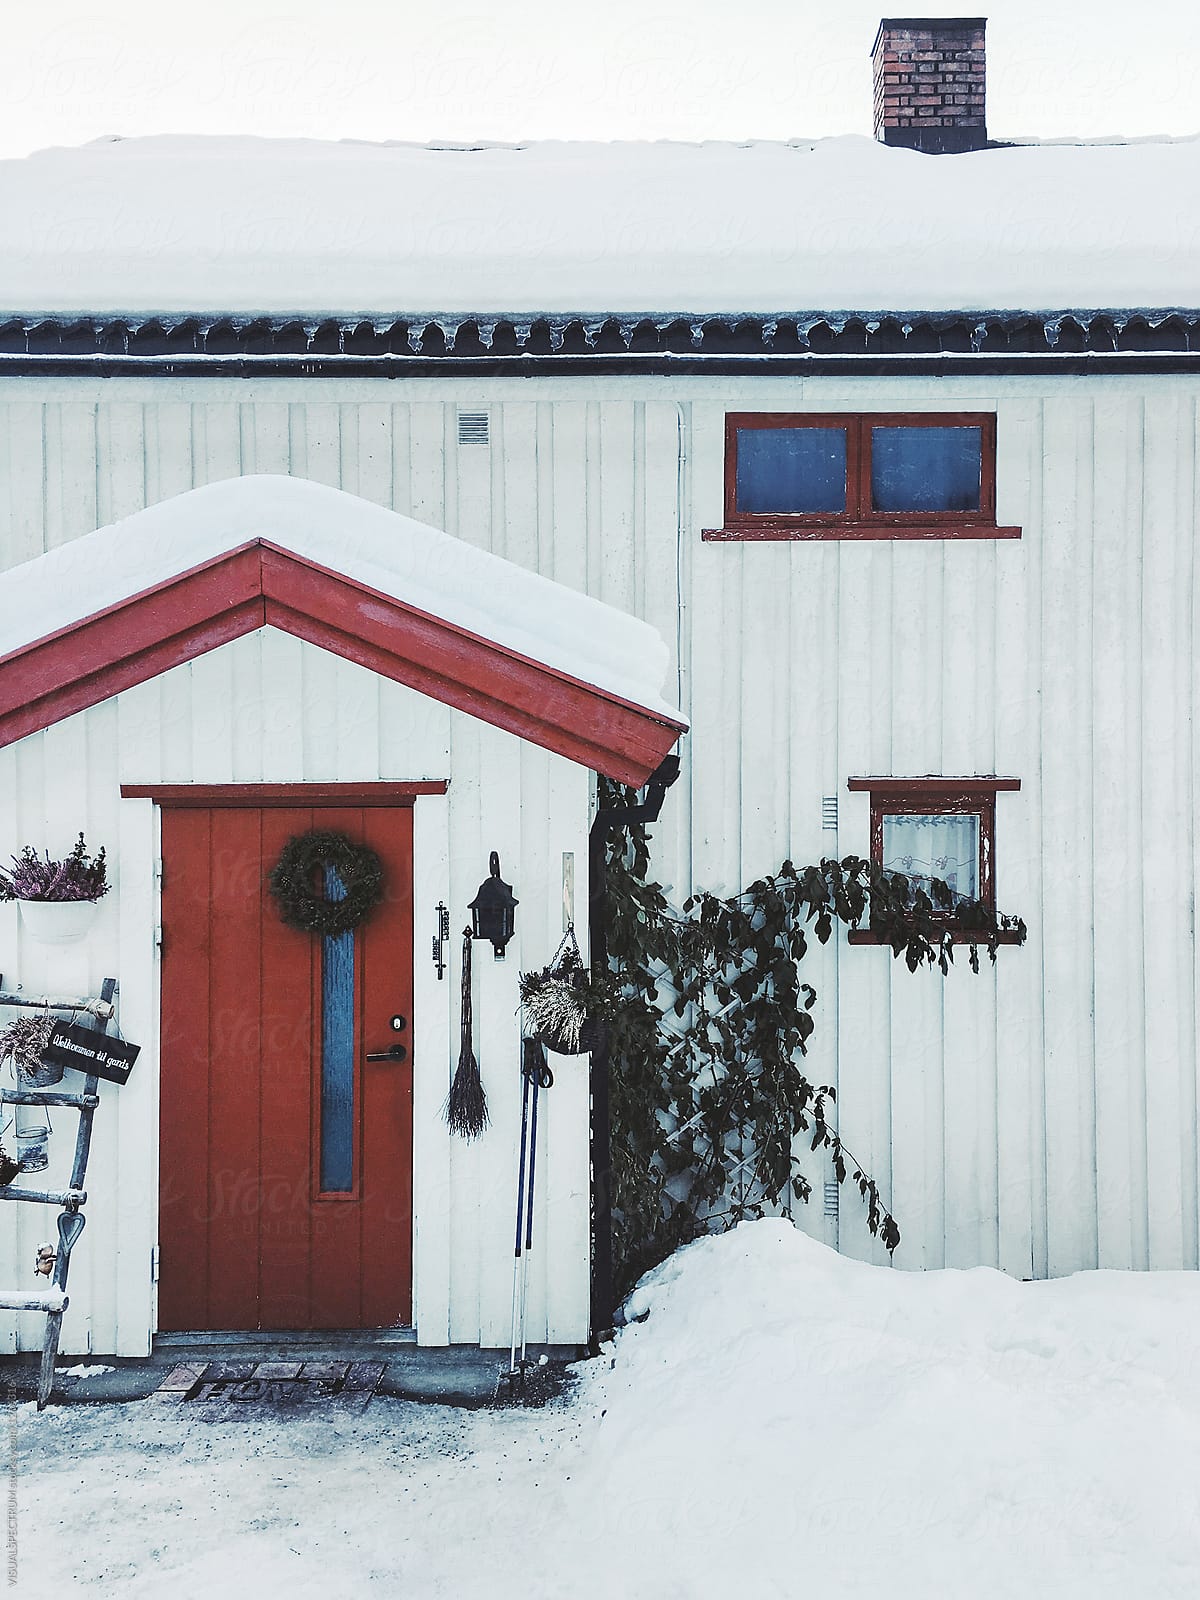 White Christmas - Xmas Decoration on Door of White Wooden Scandinavian Home